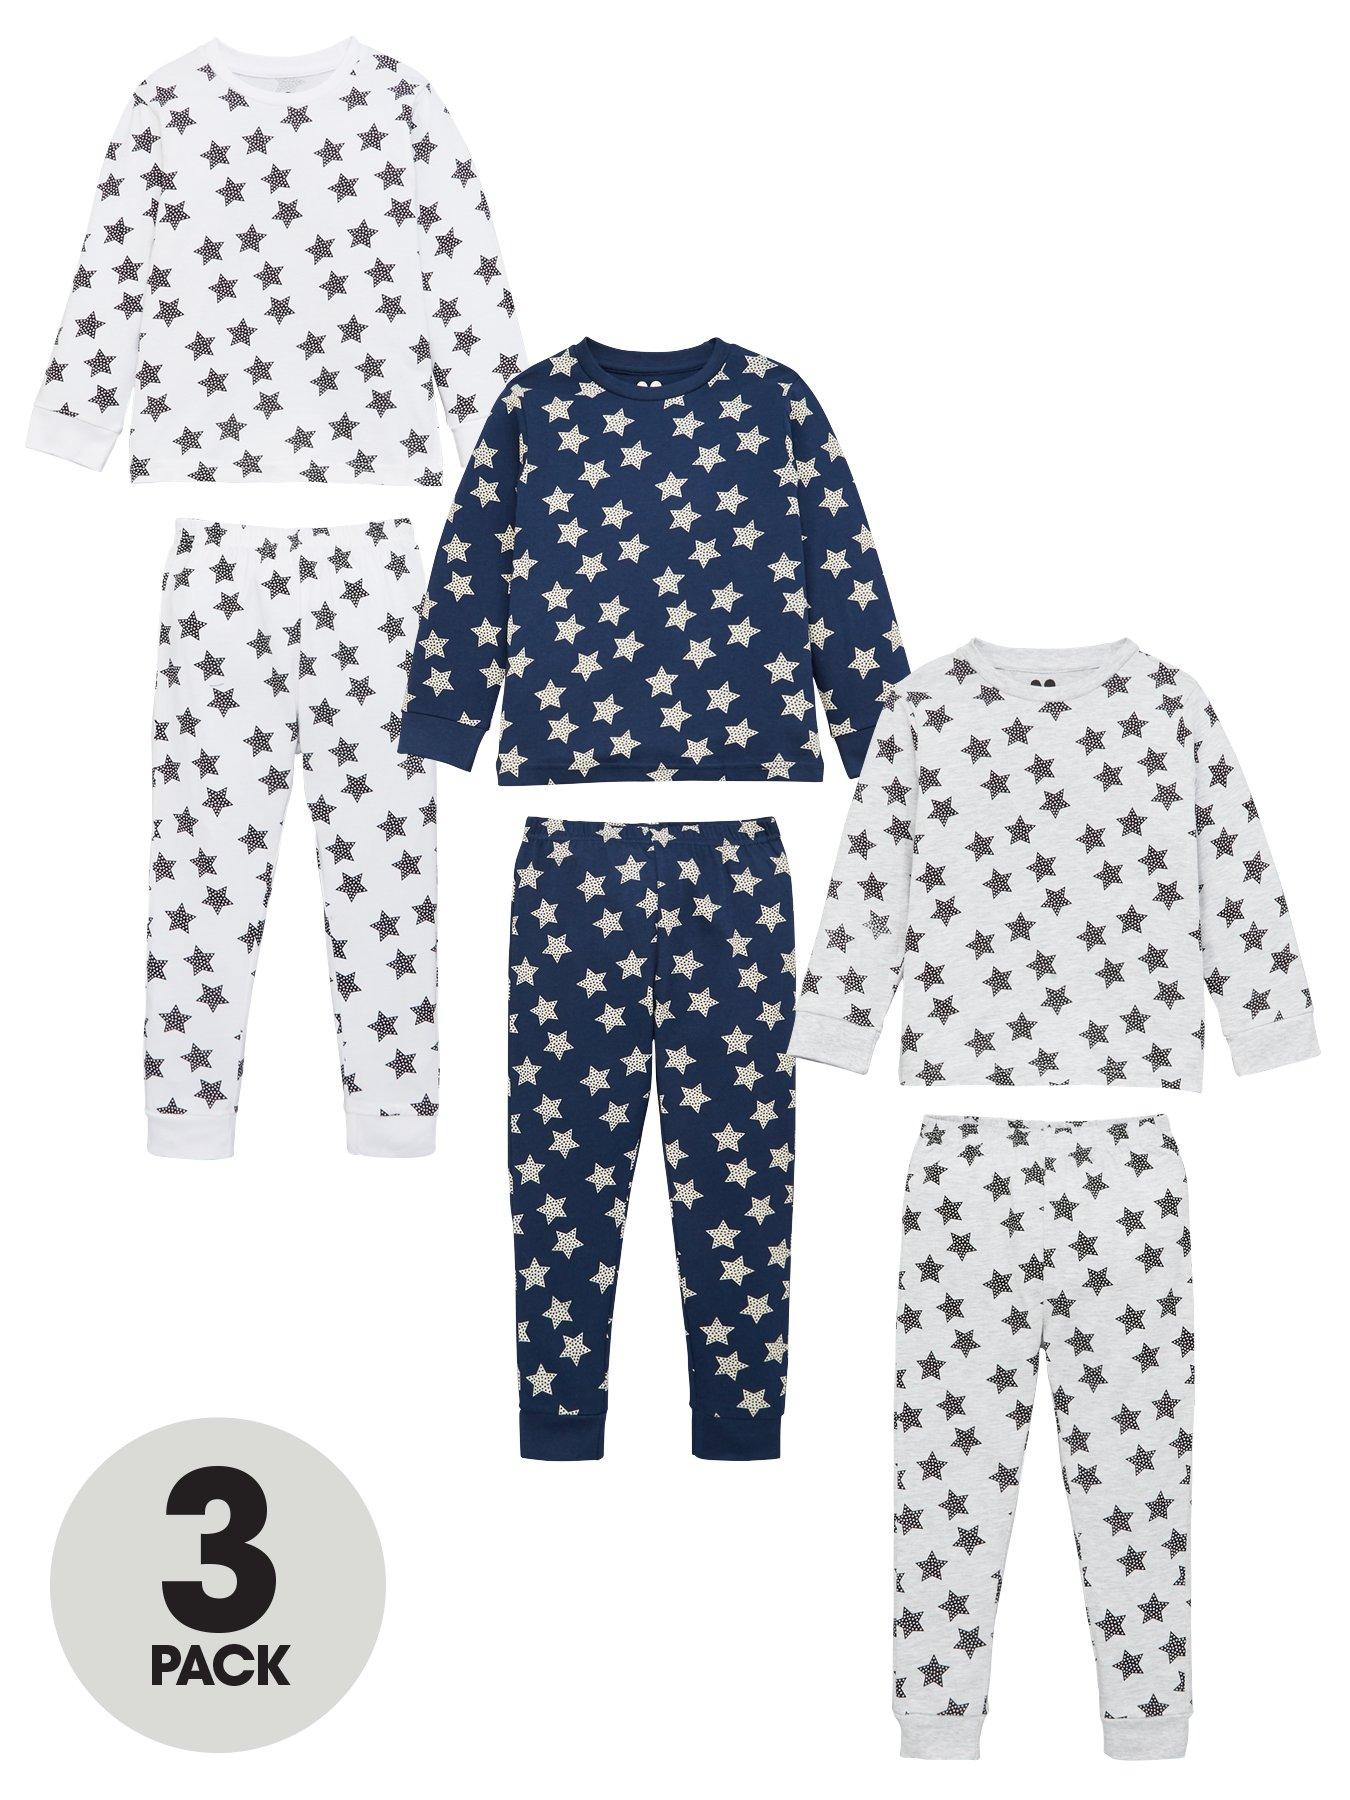 Ages 18 Months to 7 Years Snuggle Fit Ben /& Holly Boys Little Kingdom Pyjamas